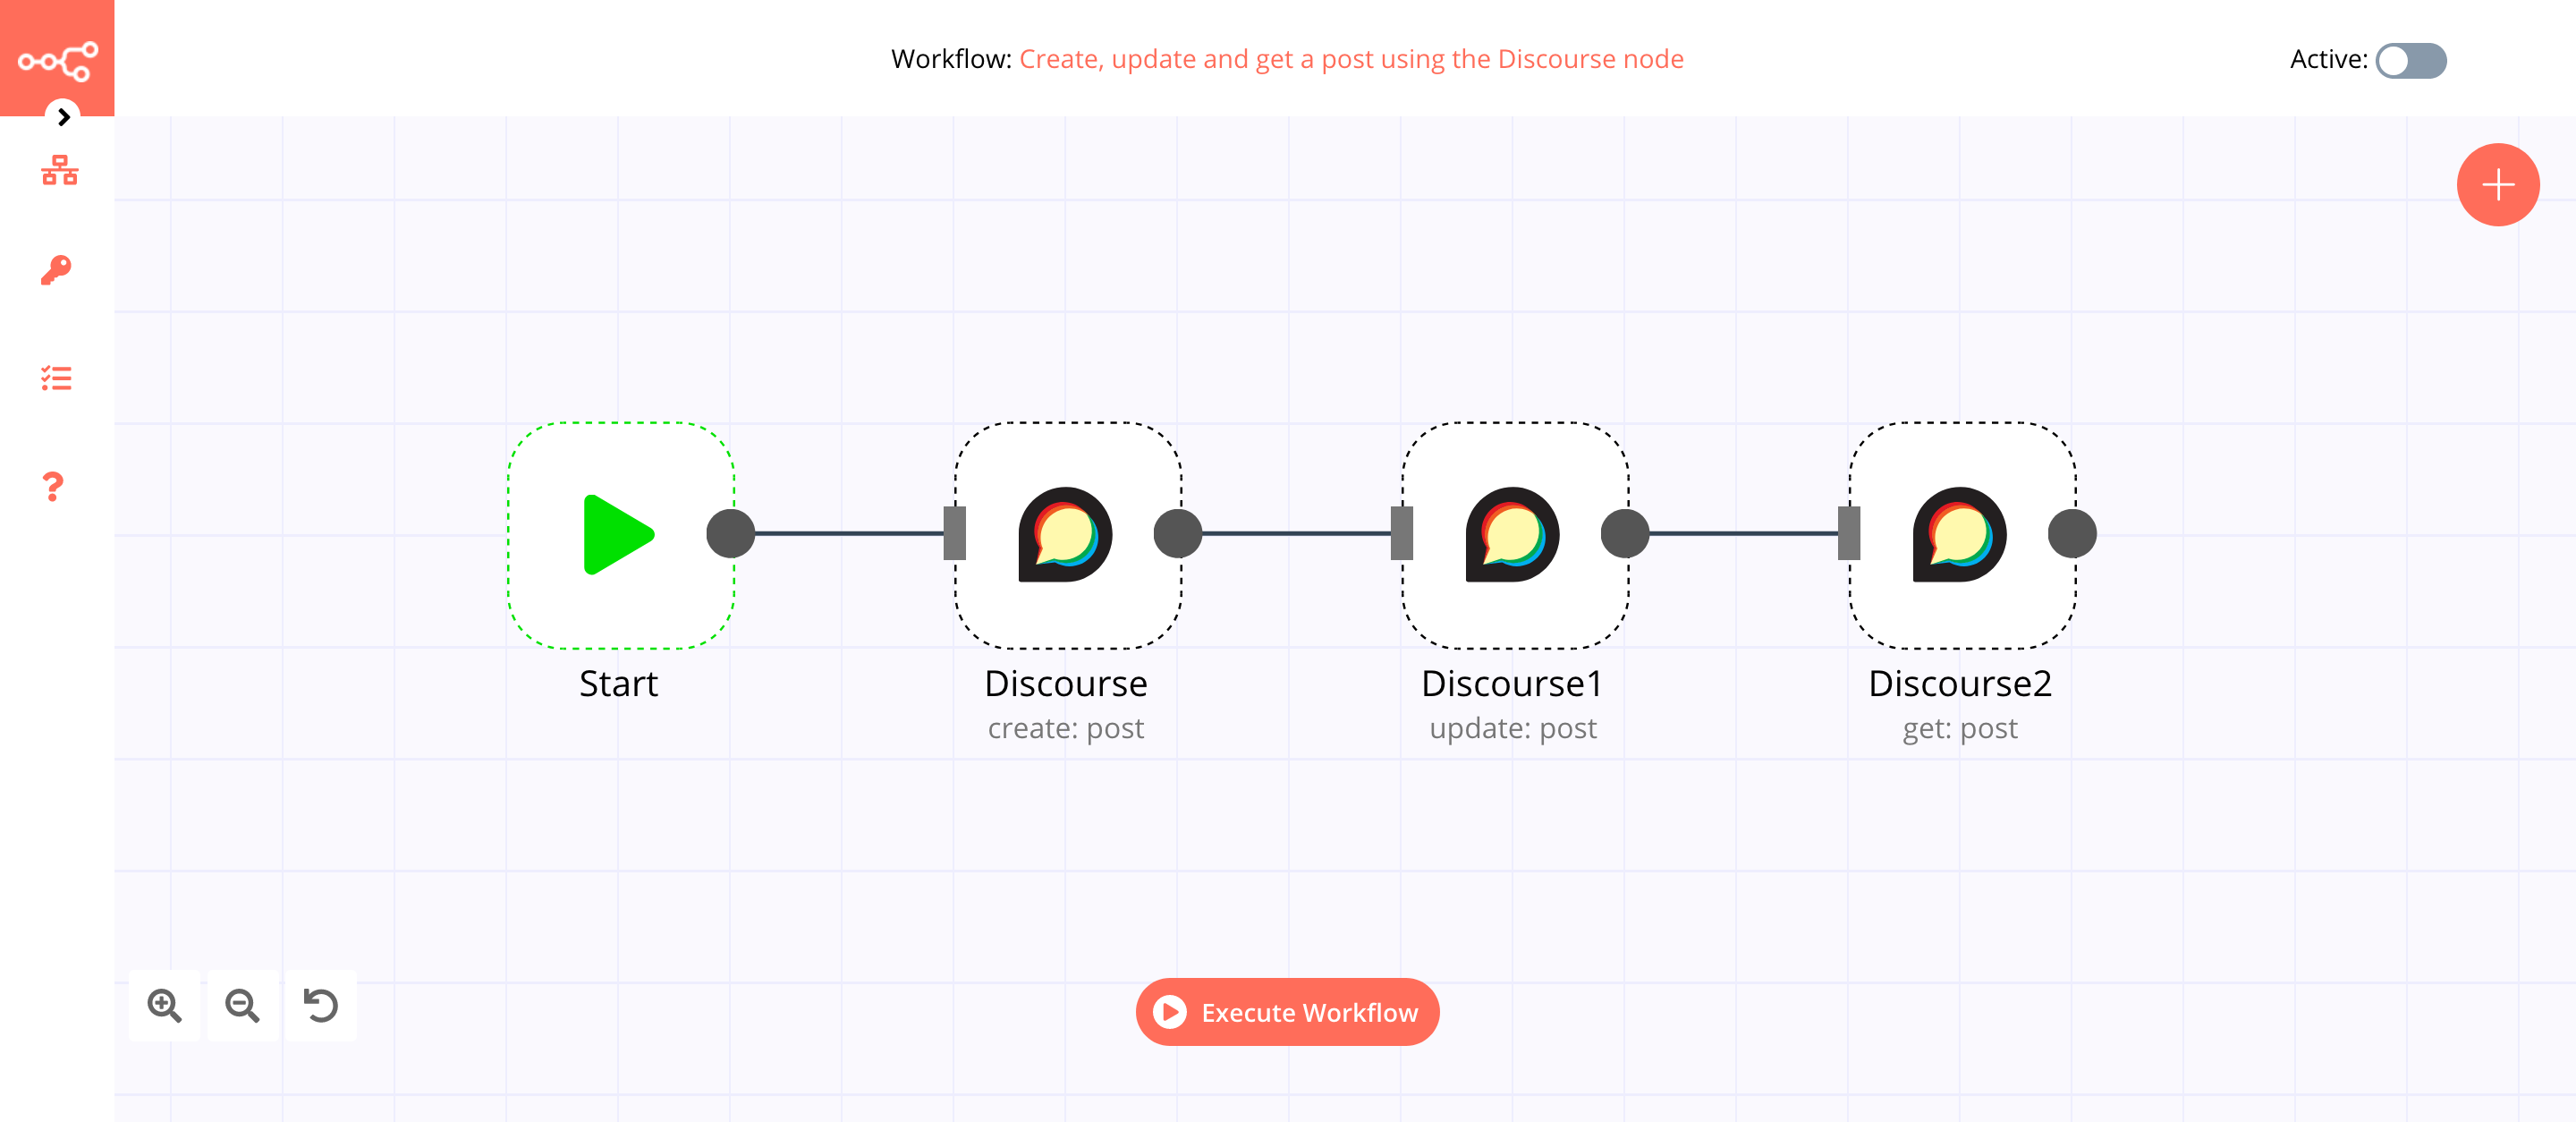 A workflow with the Discourse node